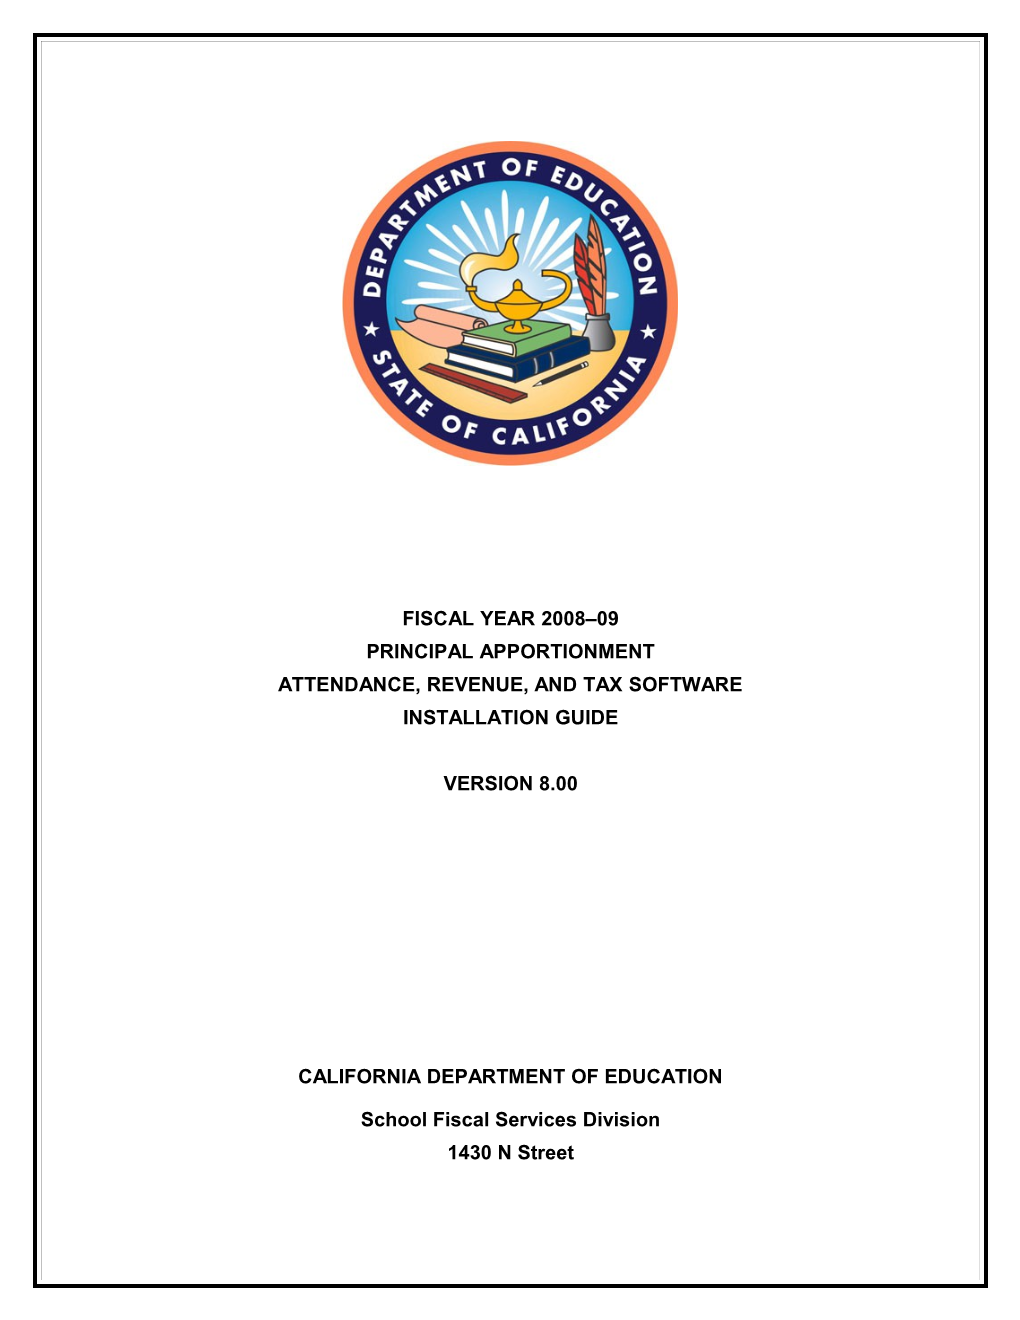 PA Software Install Guide, FY 2008-09 - Principal Apportionment (CA Dept of Education)